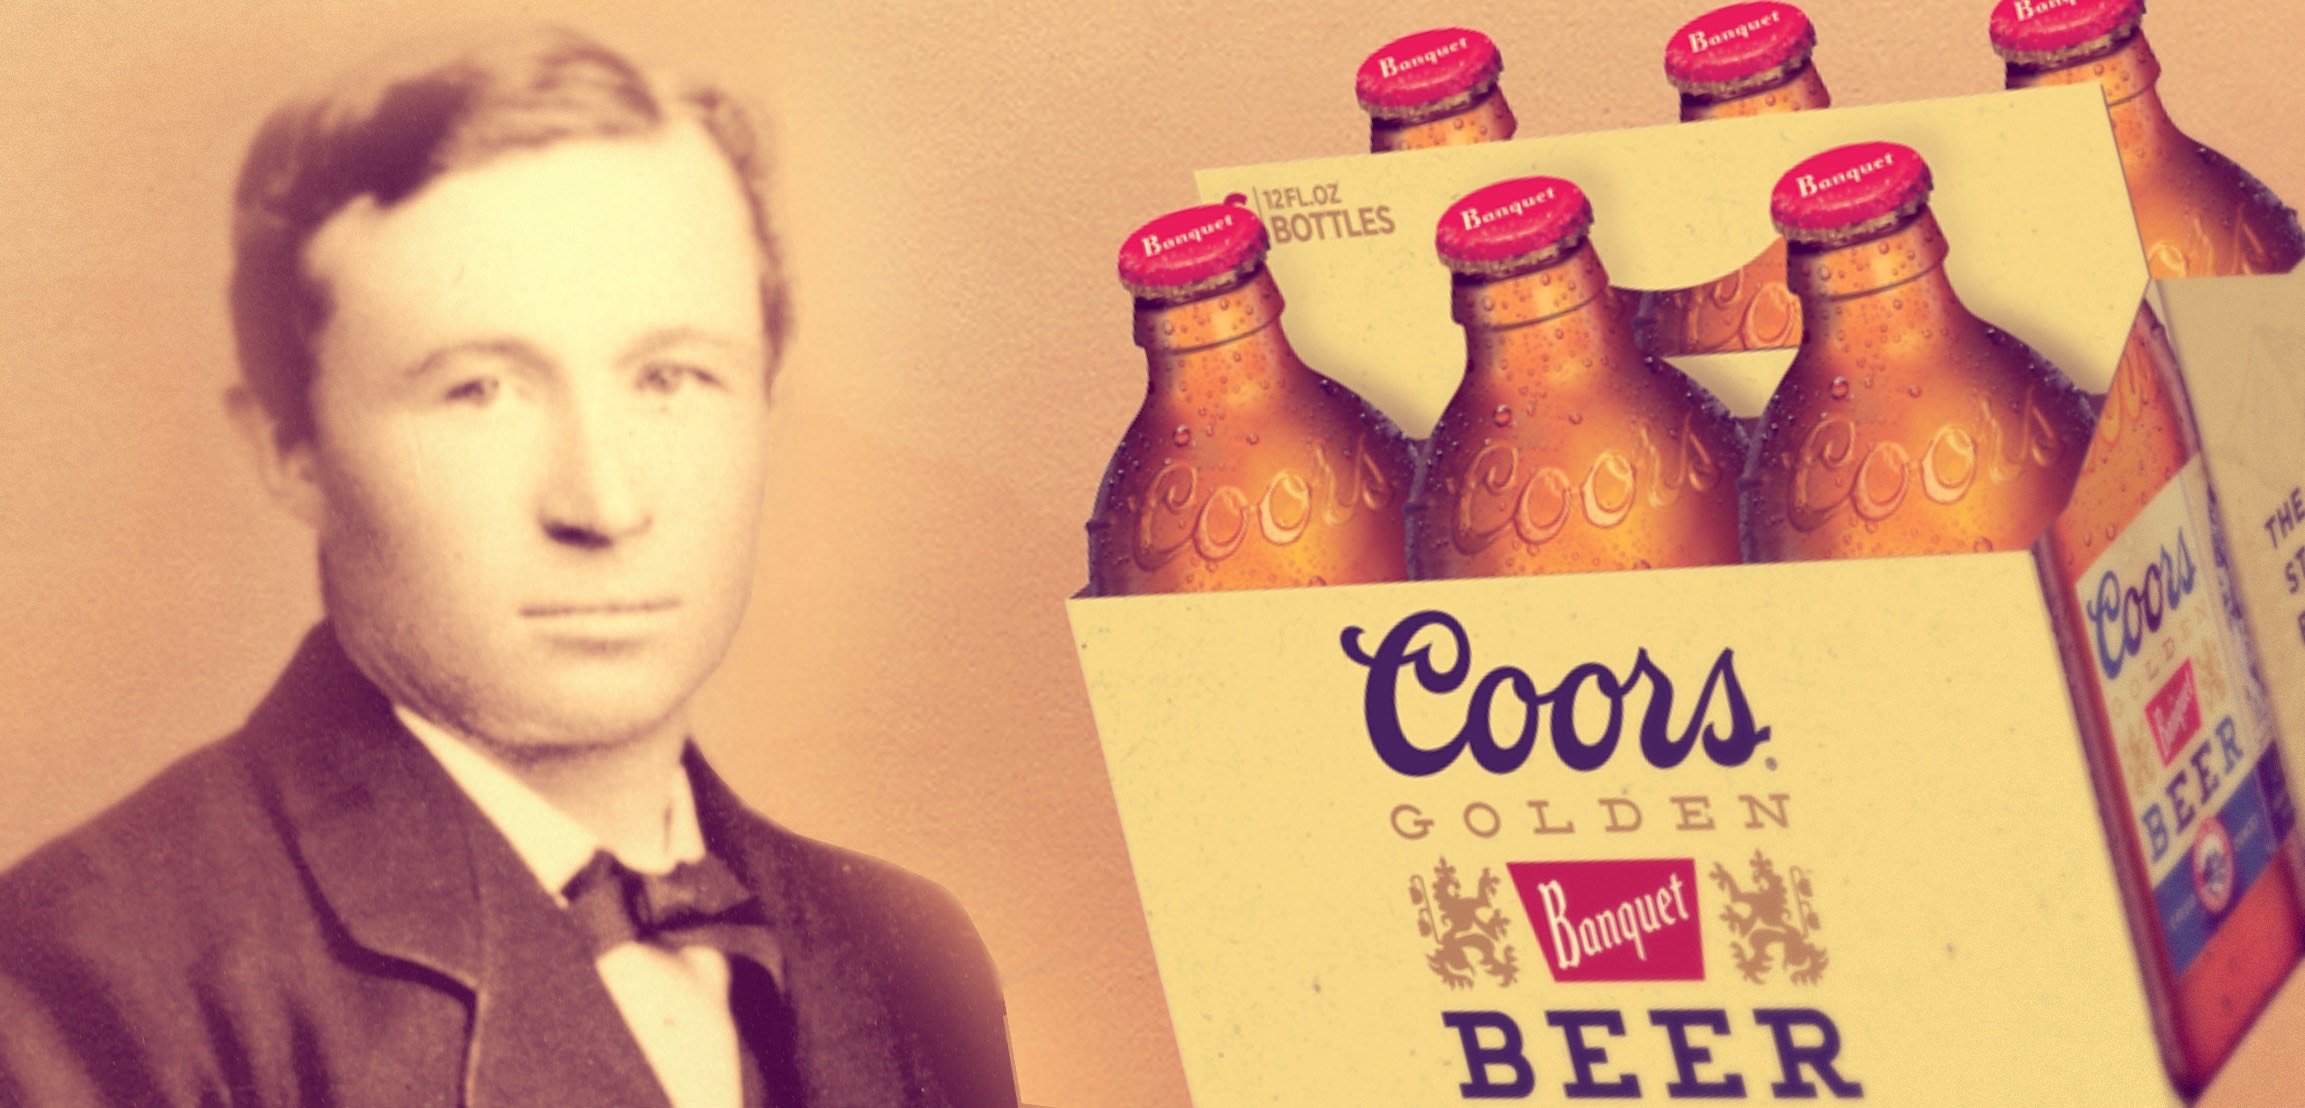 Adolph Coors: The German Immigrant Who Gave Us Banquet Beer